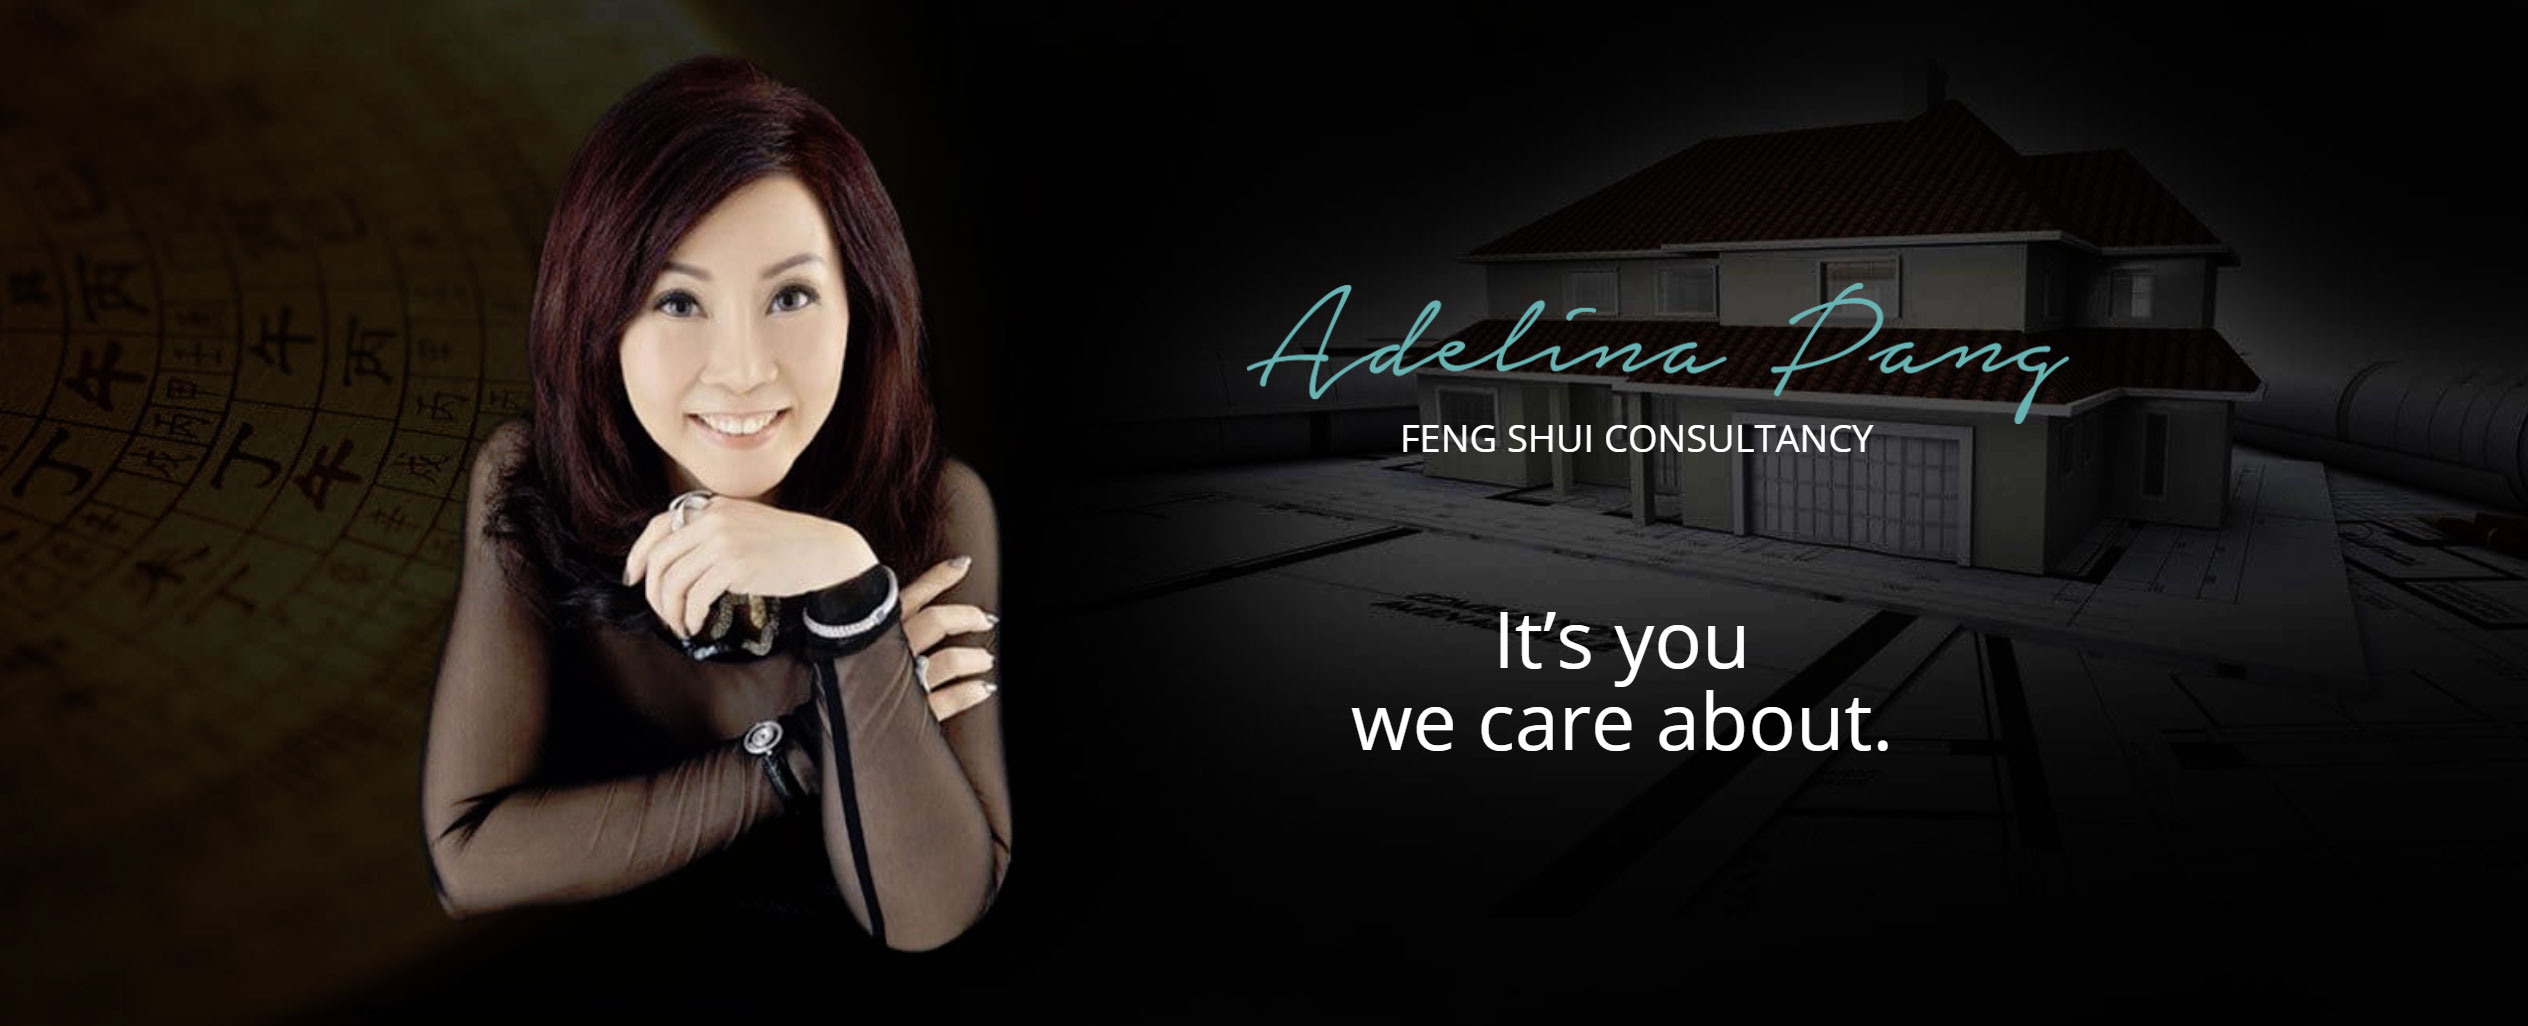 Feng Shui Consulting Services Singapore | Fengshui | Adelina Pang